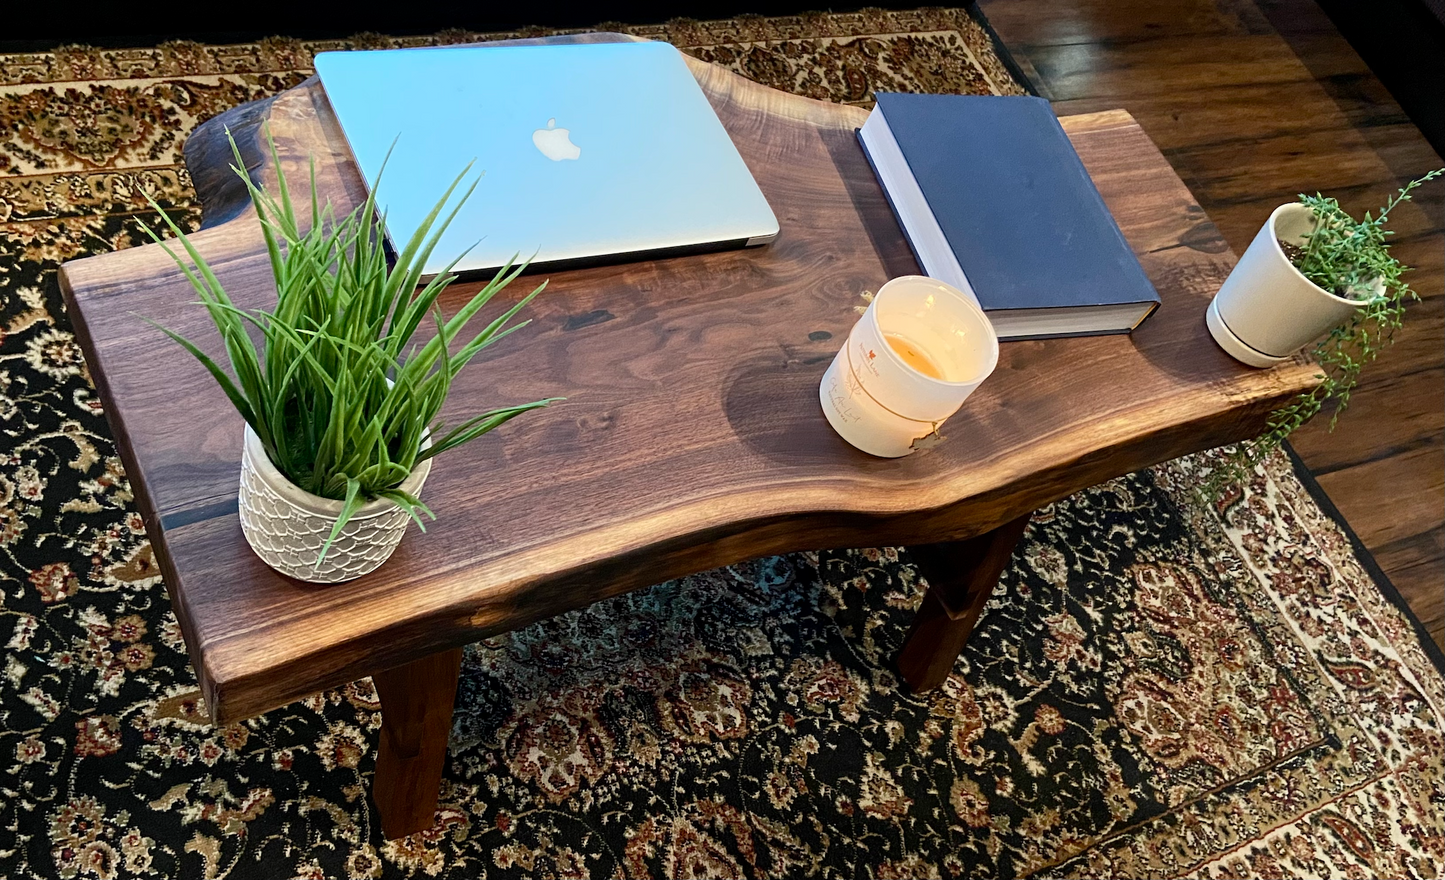  Walnut Rustic Live Edge Wood Table|Forked Walnut Wood Coffee Table|Natural Edge Wood Walnut Table|Rustic Wood Display Table w/Unique Grains